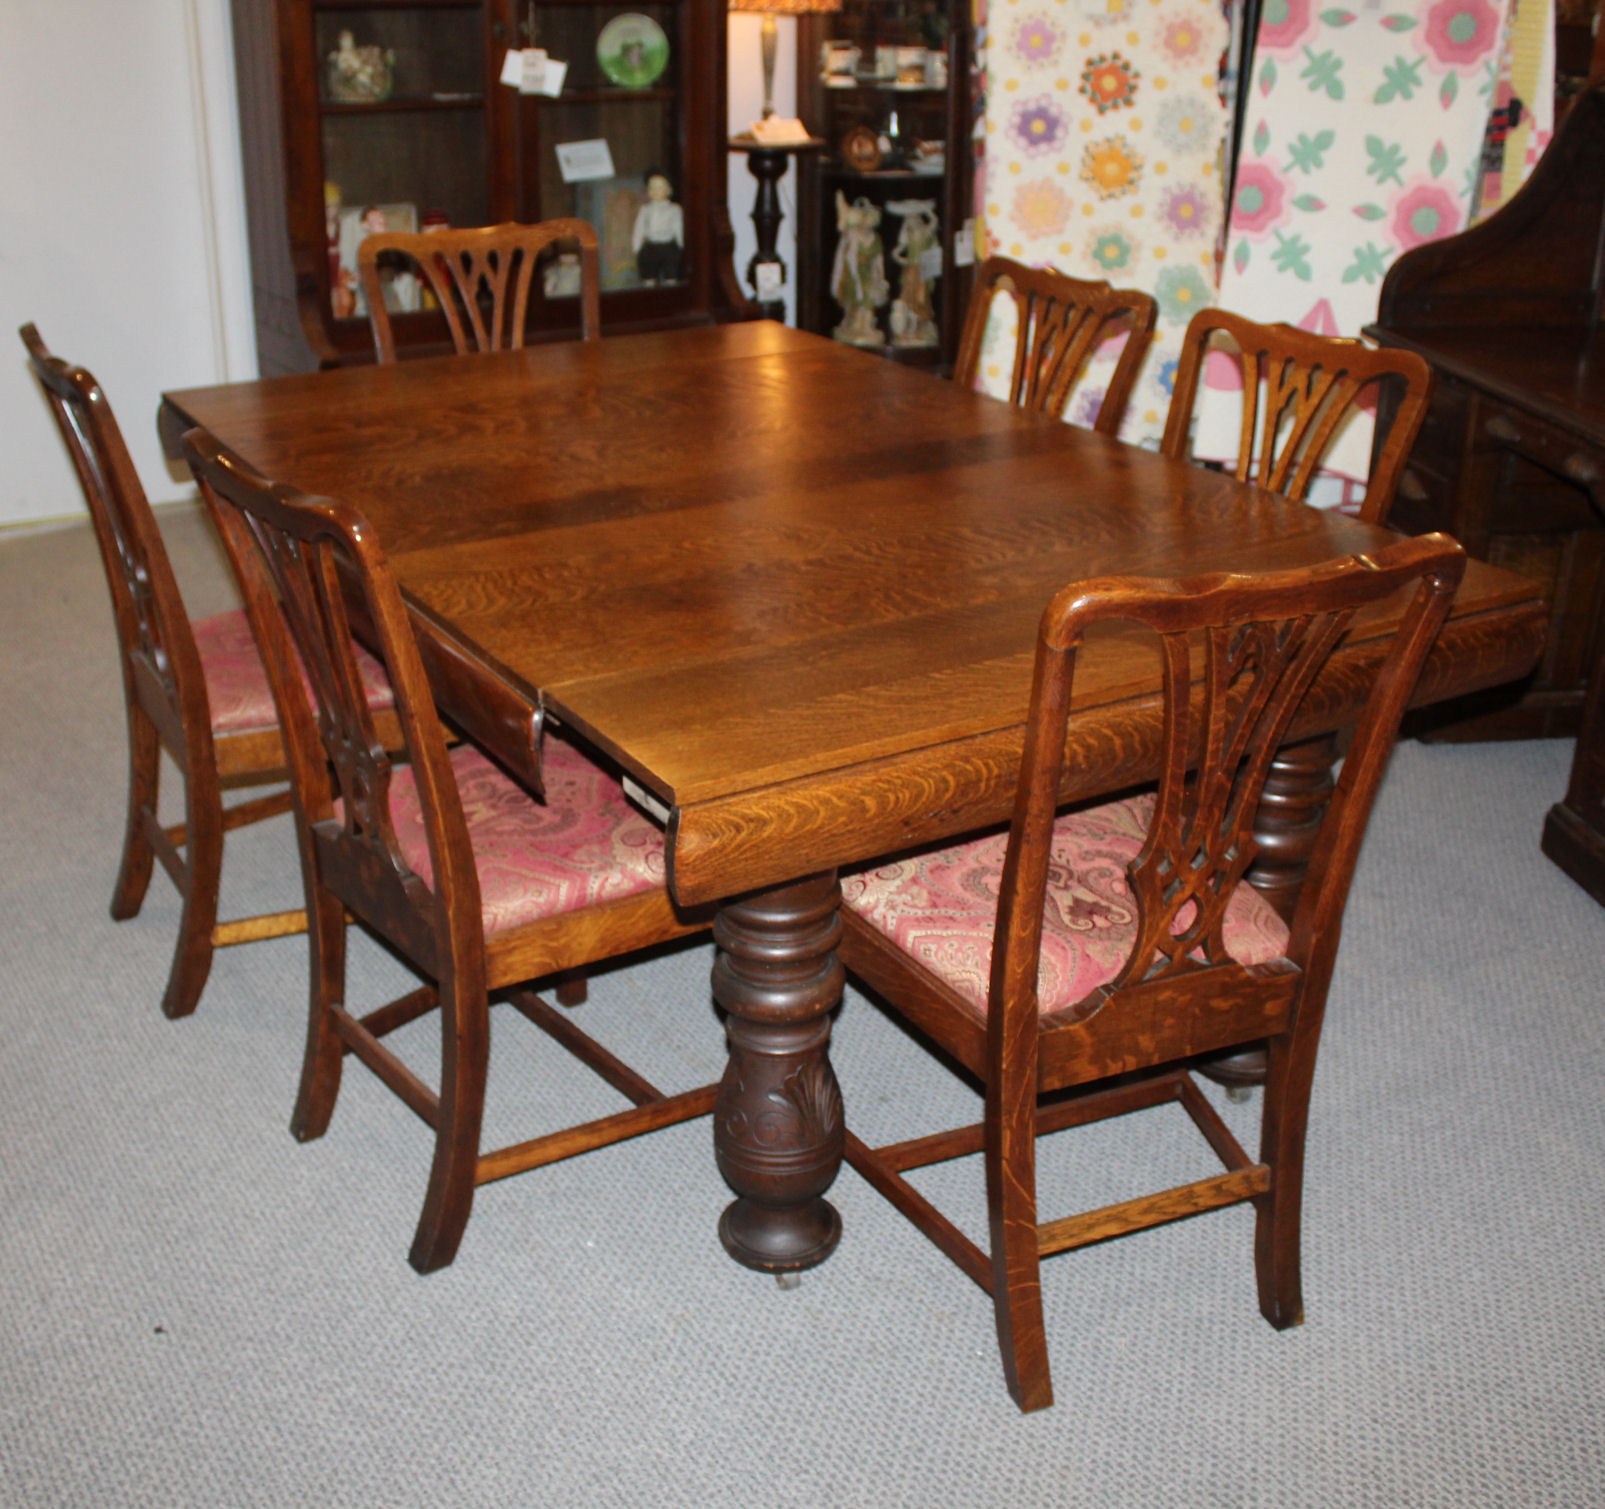 Antique Square Oak Five Legged Dining, Dining Room Table With Self Storing Leaves